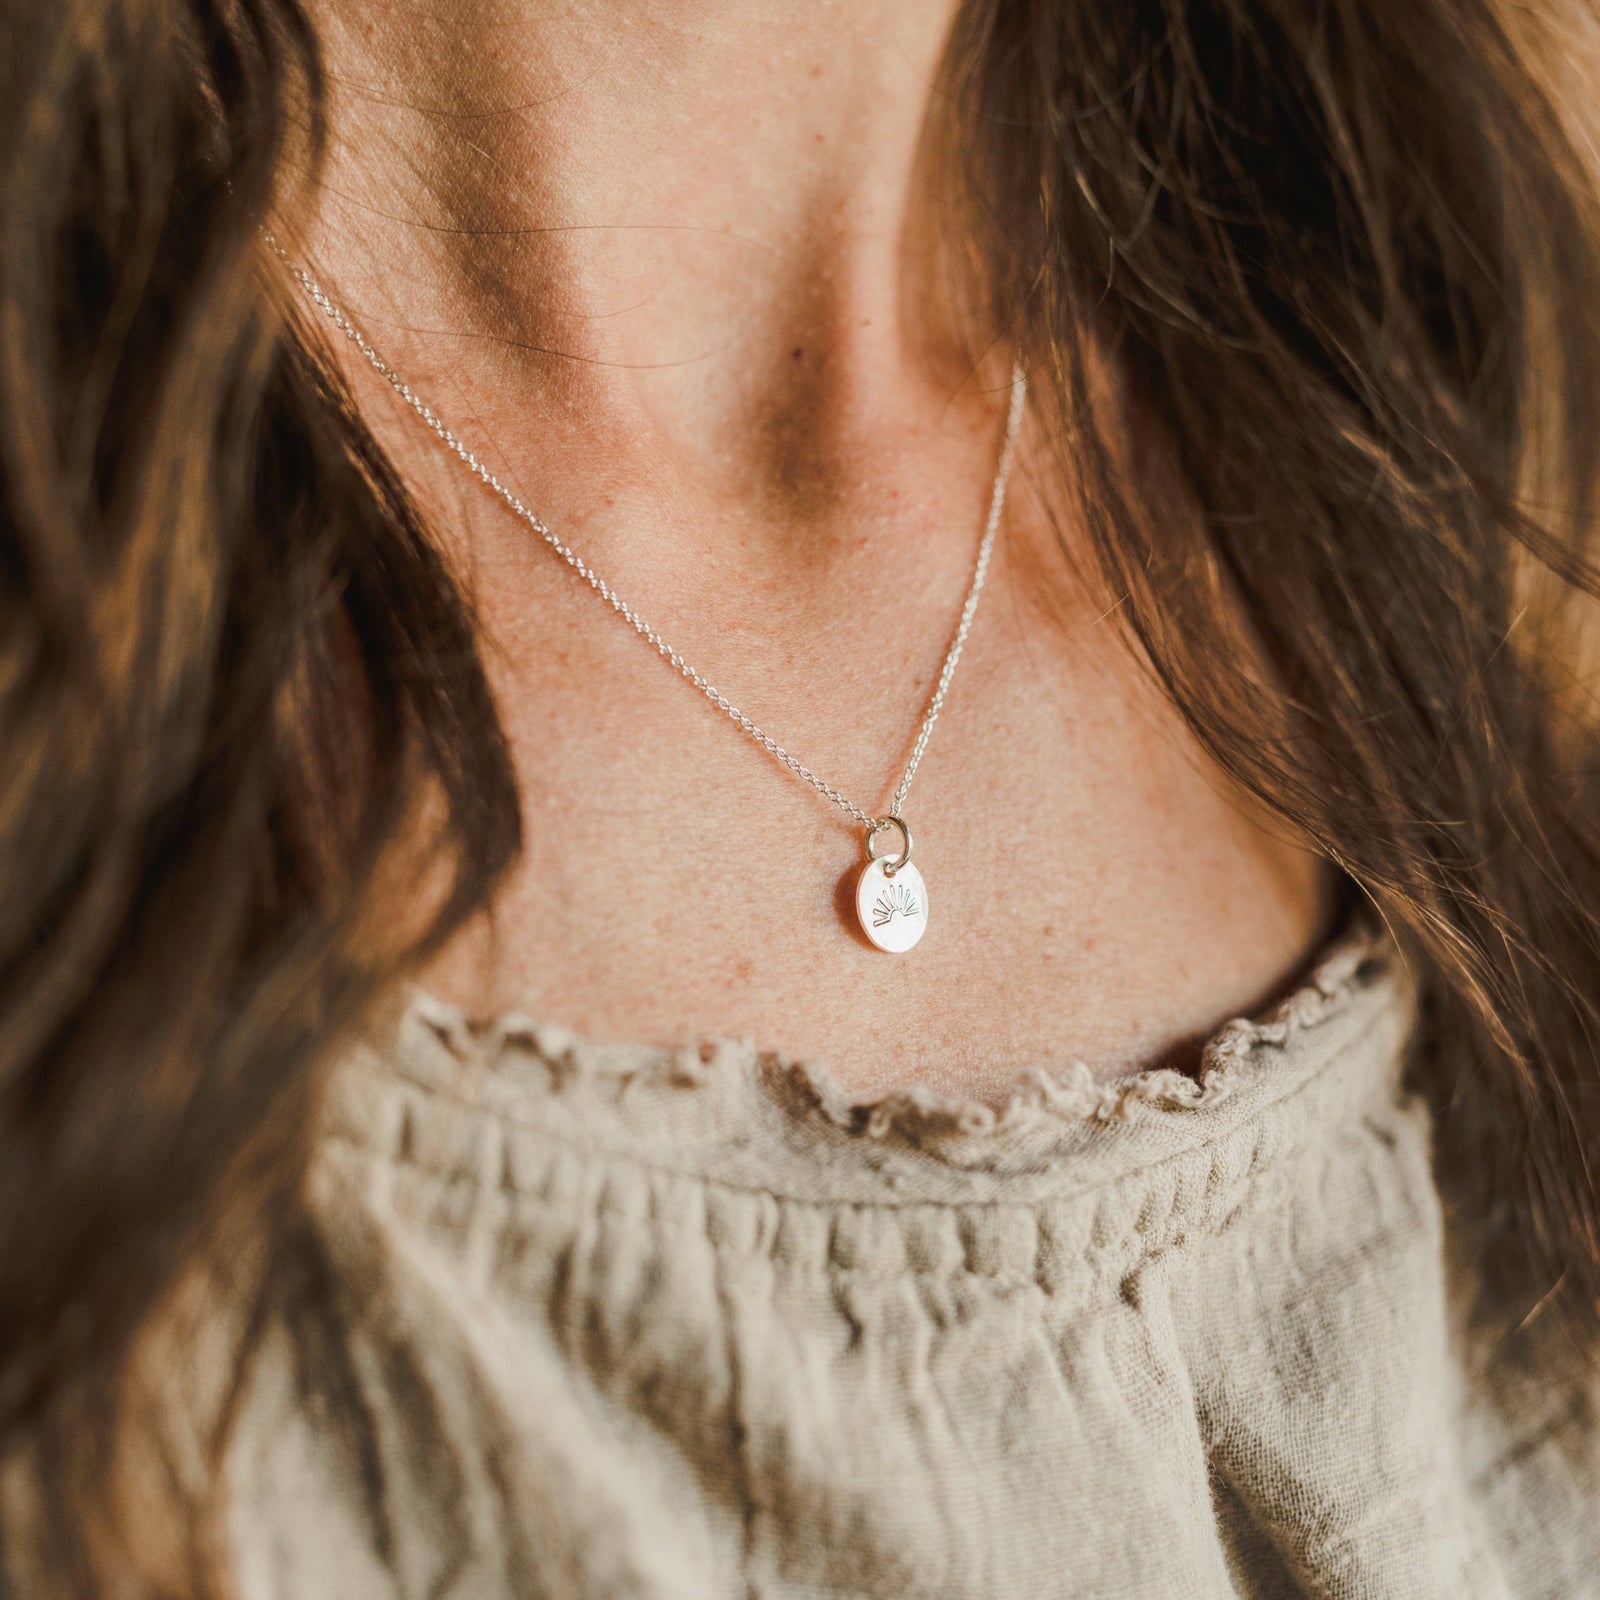 A close-up of a woman wearing a delicate You Are My Sunshine Necklace by Becoming Jewelry with a small, round sunshine charm pendant.